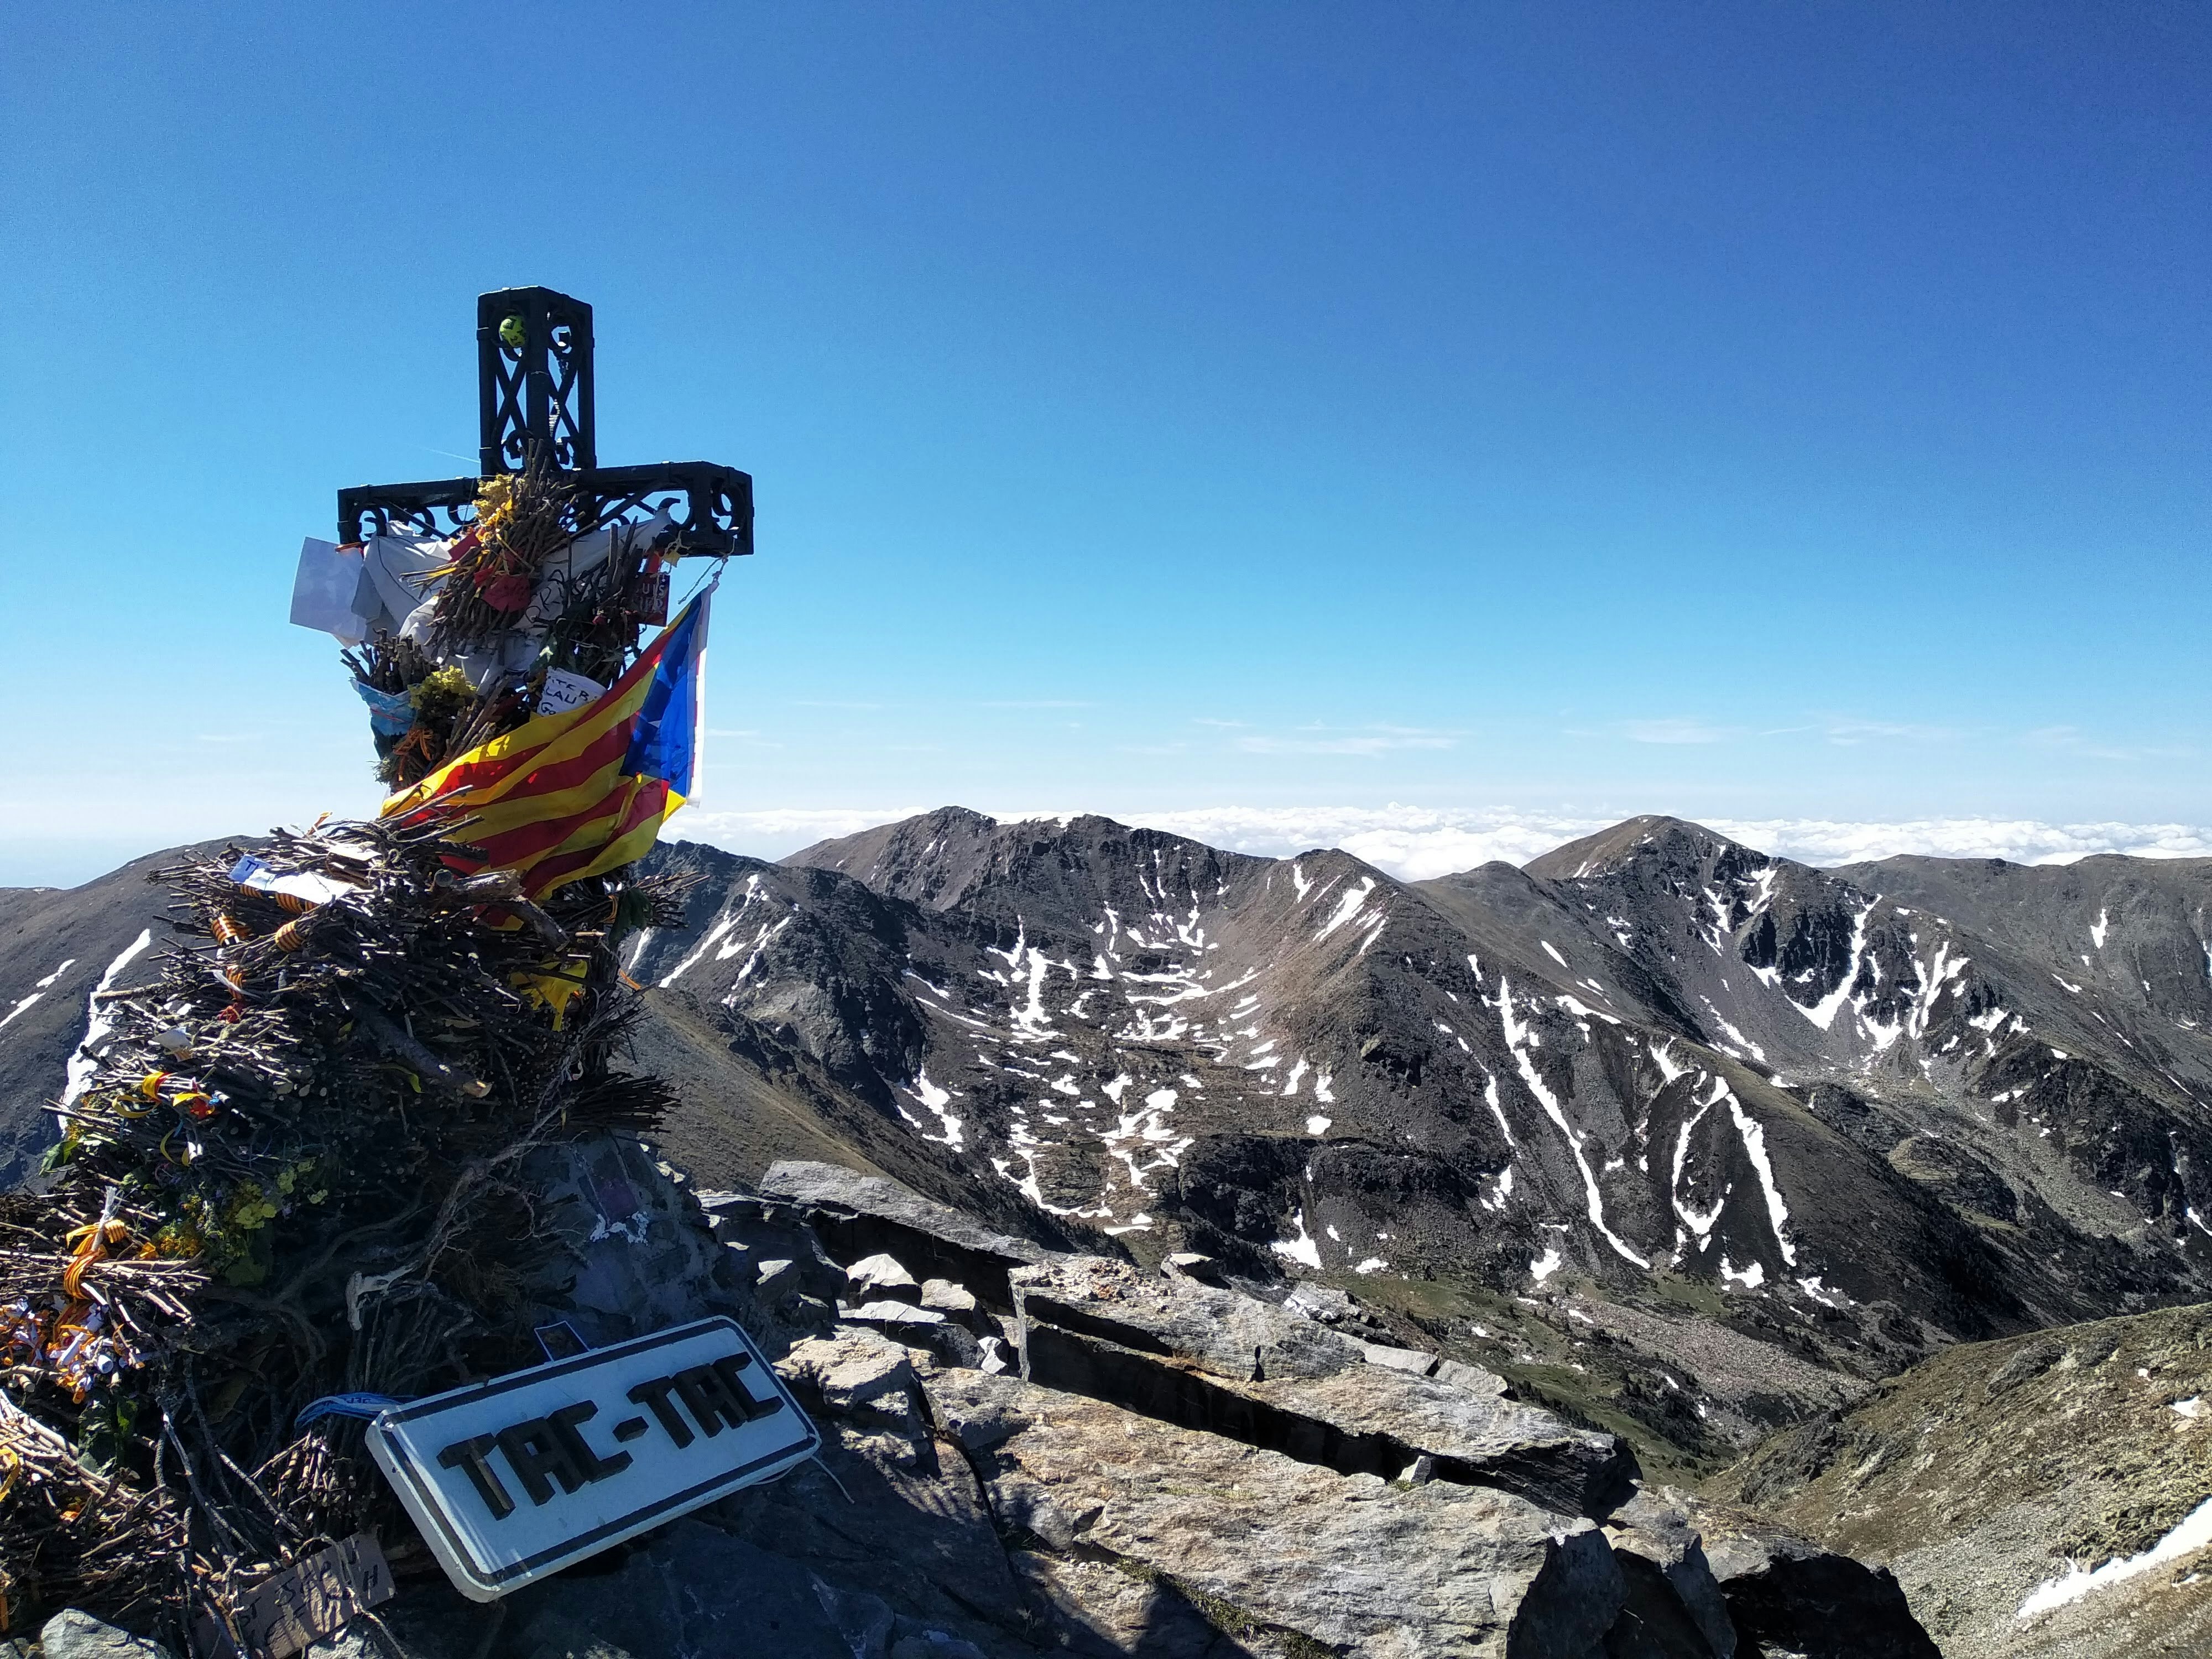 The Peak of Canigou, with a large crucifix crowning mountain scenery. 